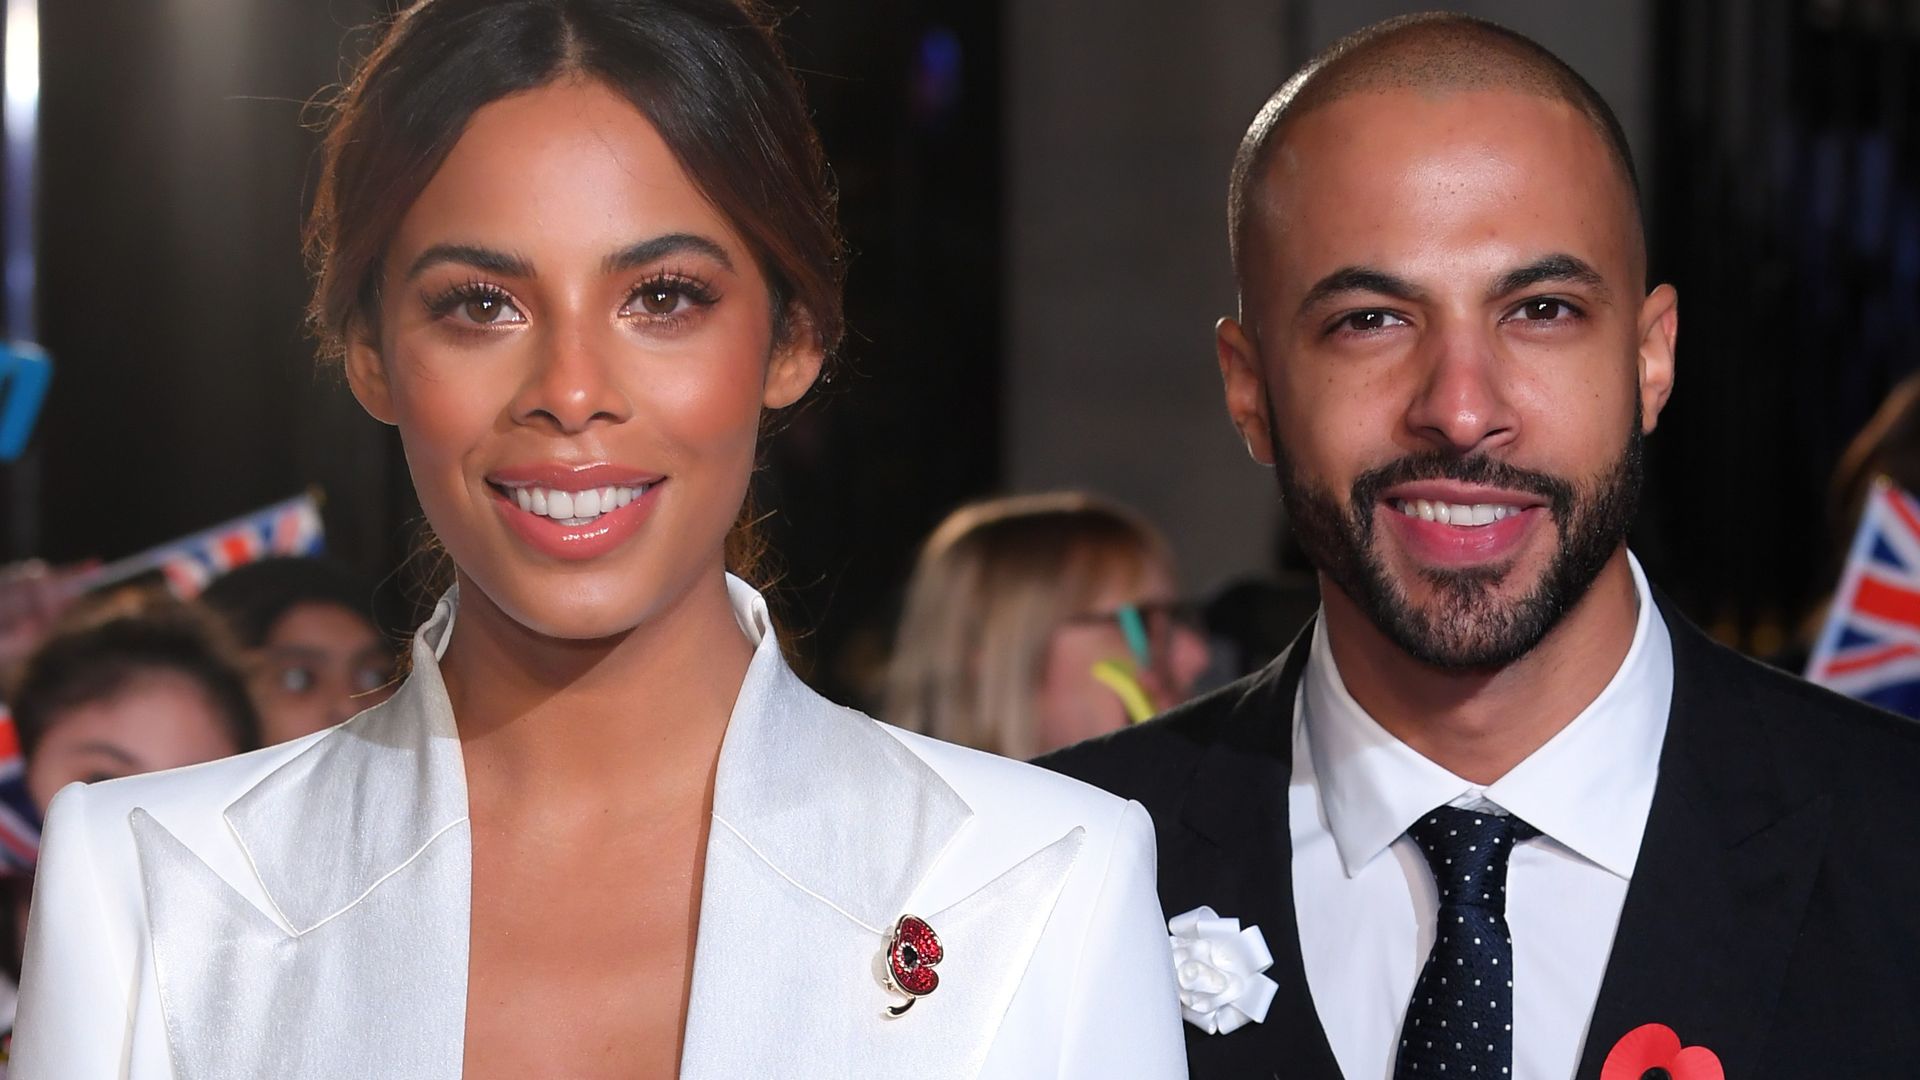 Rochelle Humes wearing a white jumpsuit on the red carpet with Marvin Humes